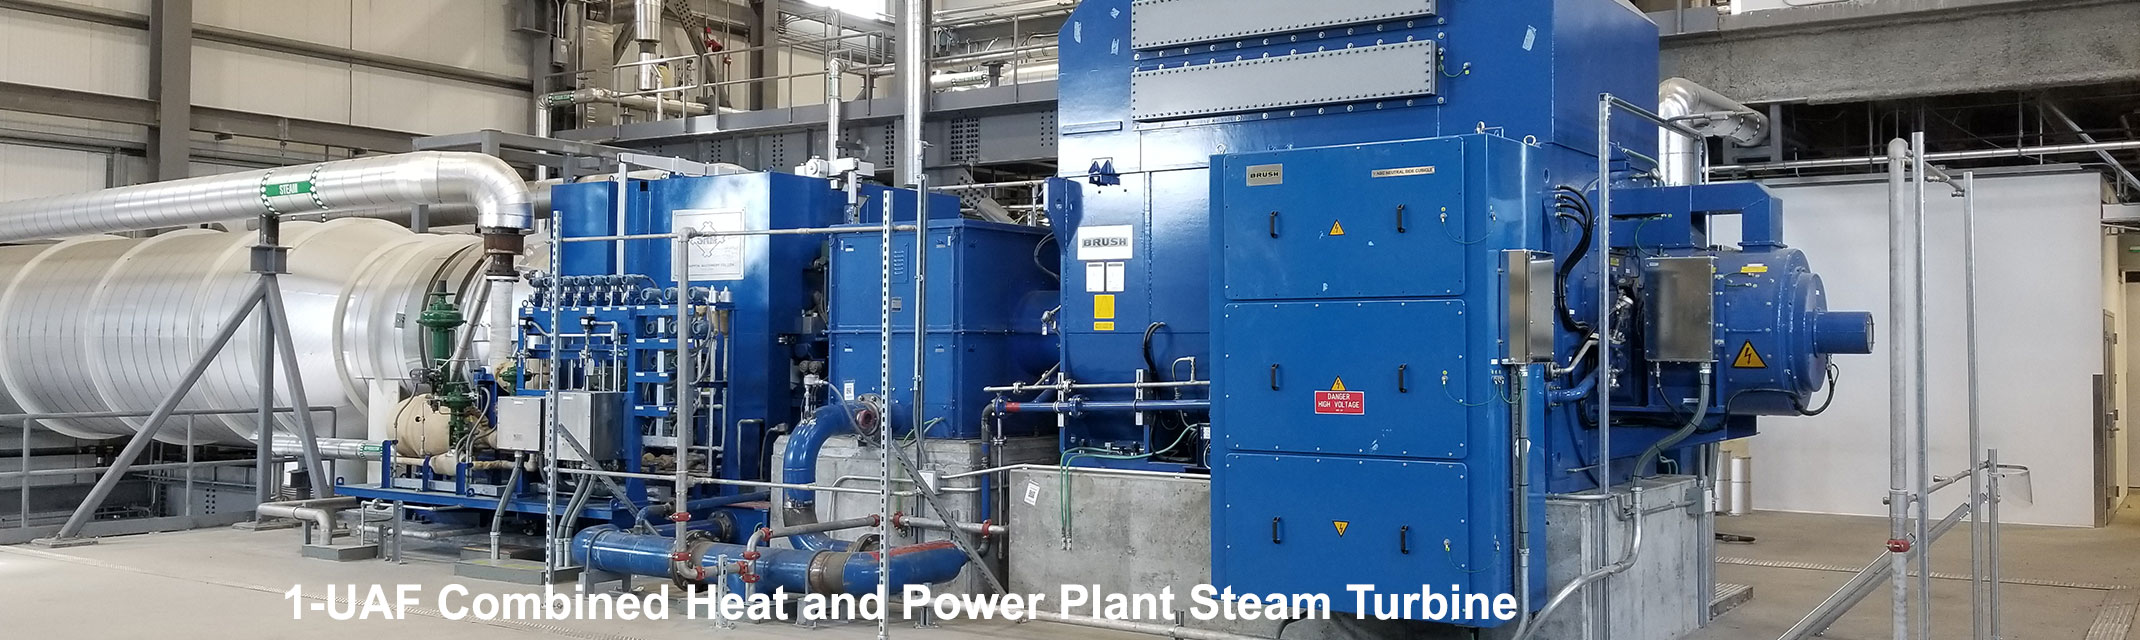 UAF Combined Heat and Power Plant Steam Turbine